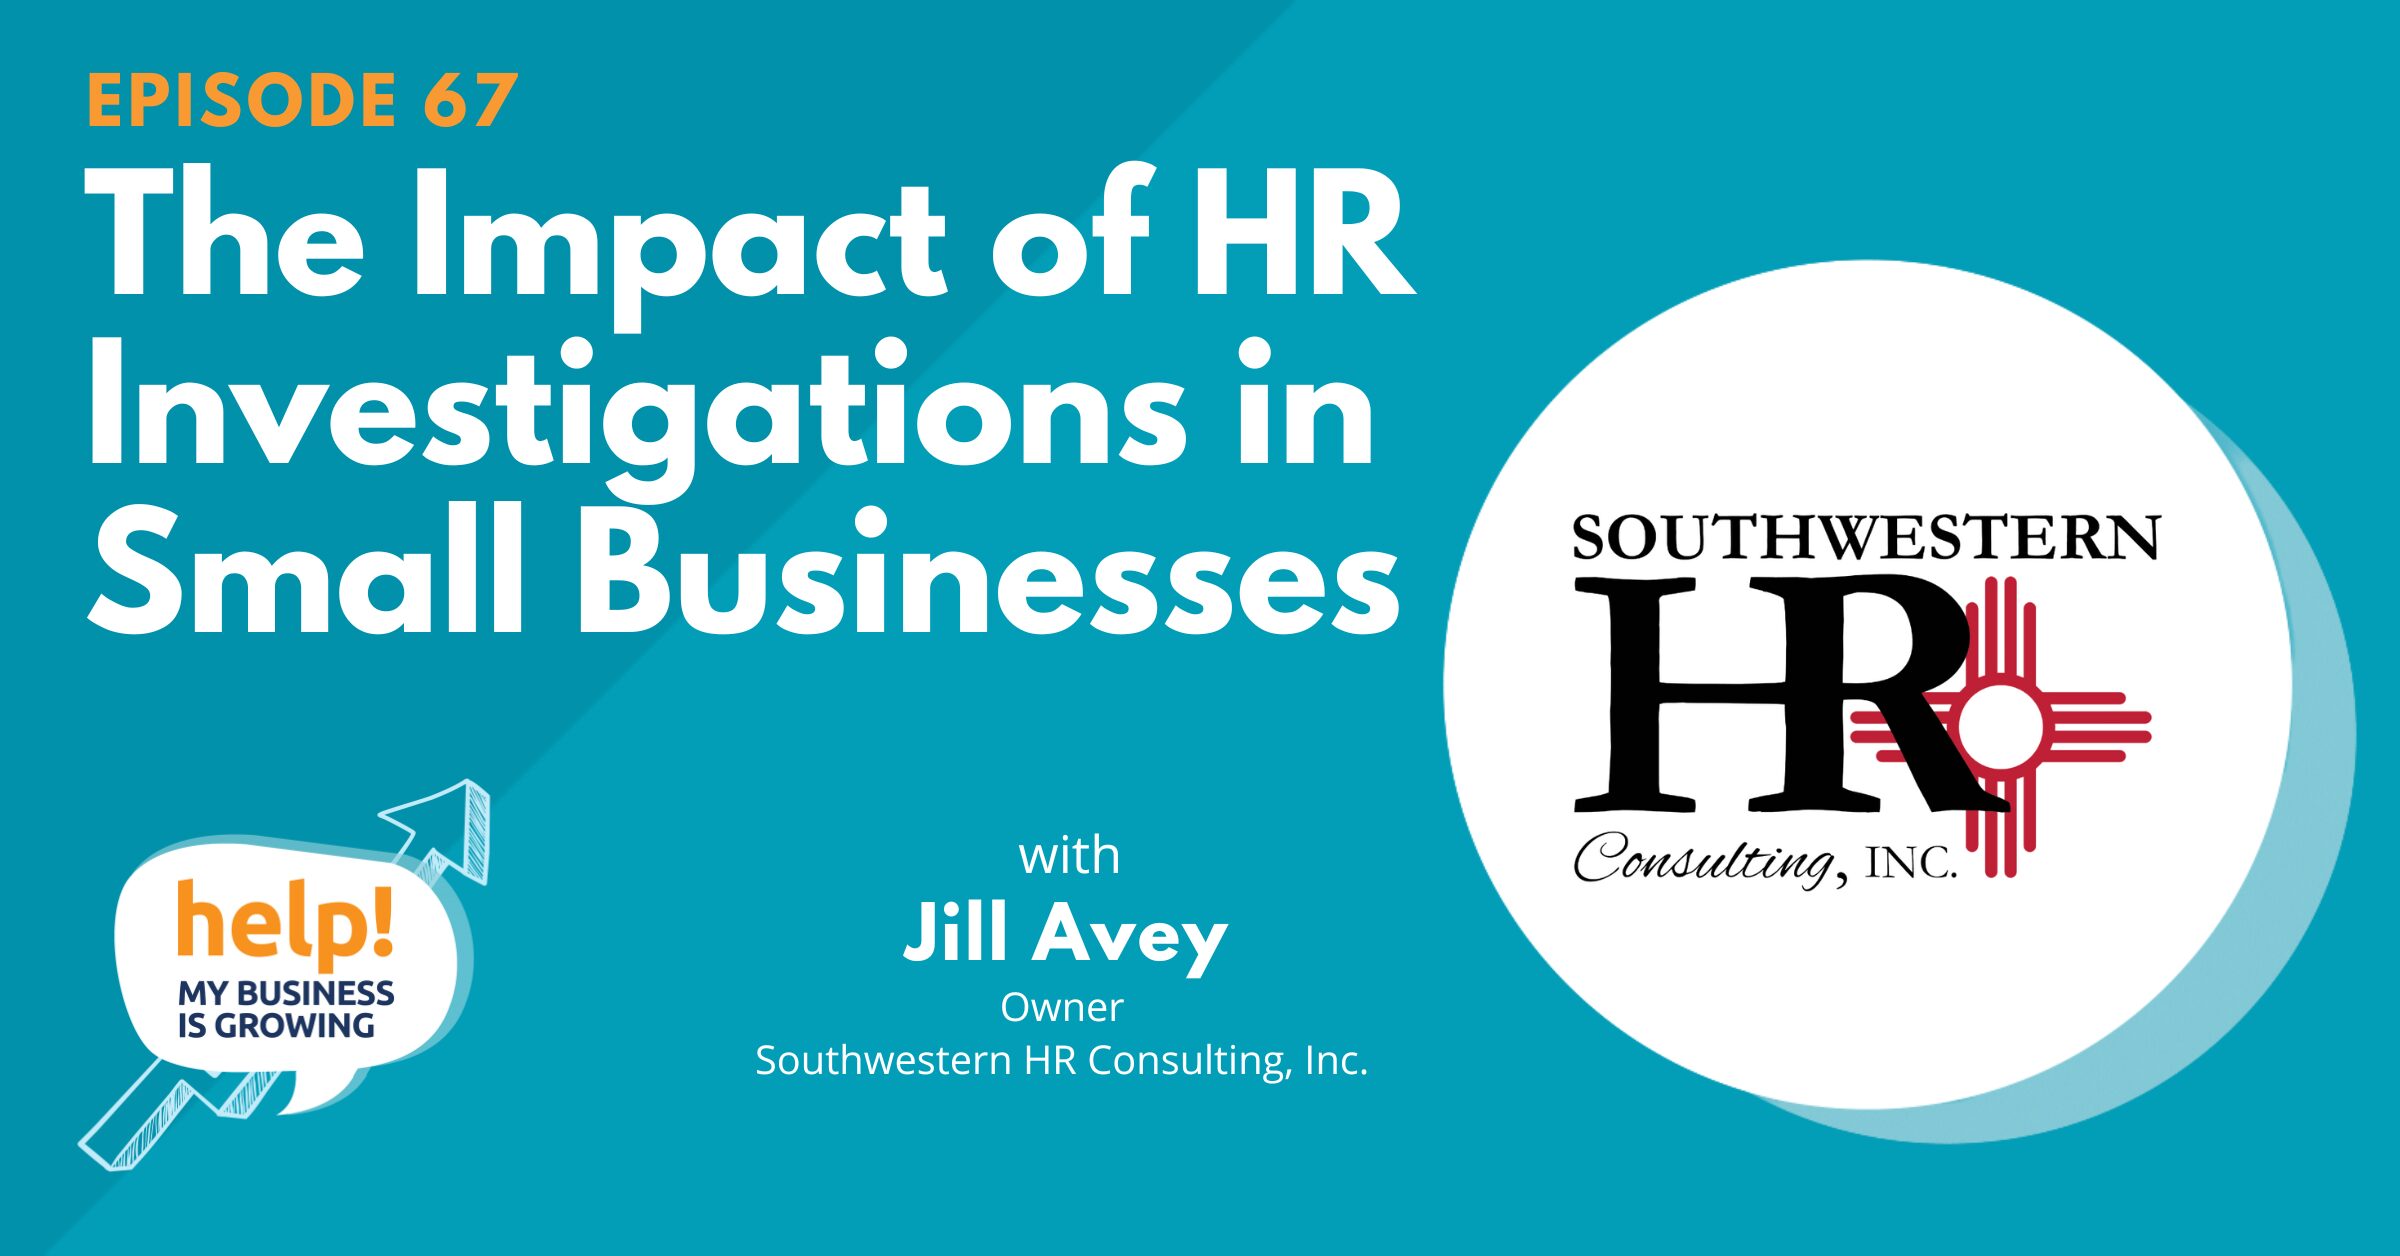 The Impact of HR Investigations in Small Businesses